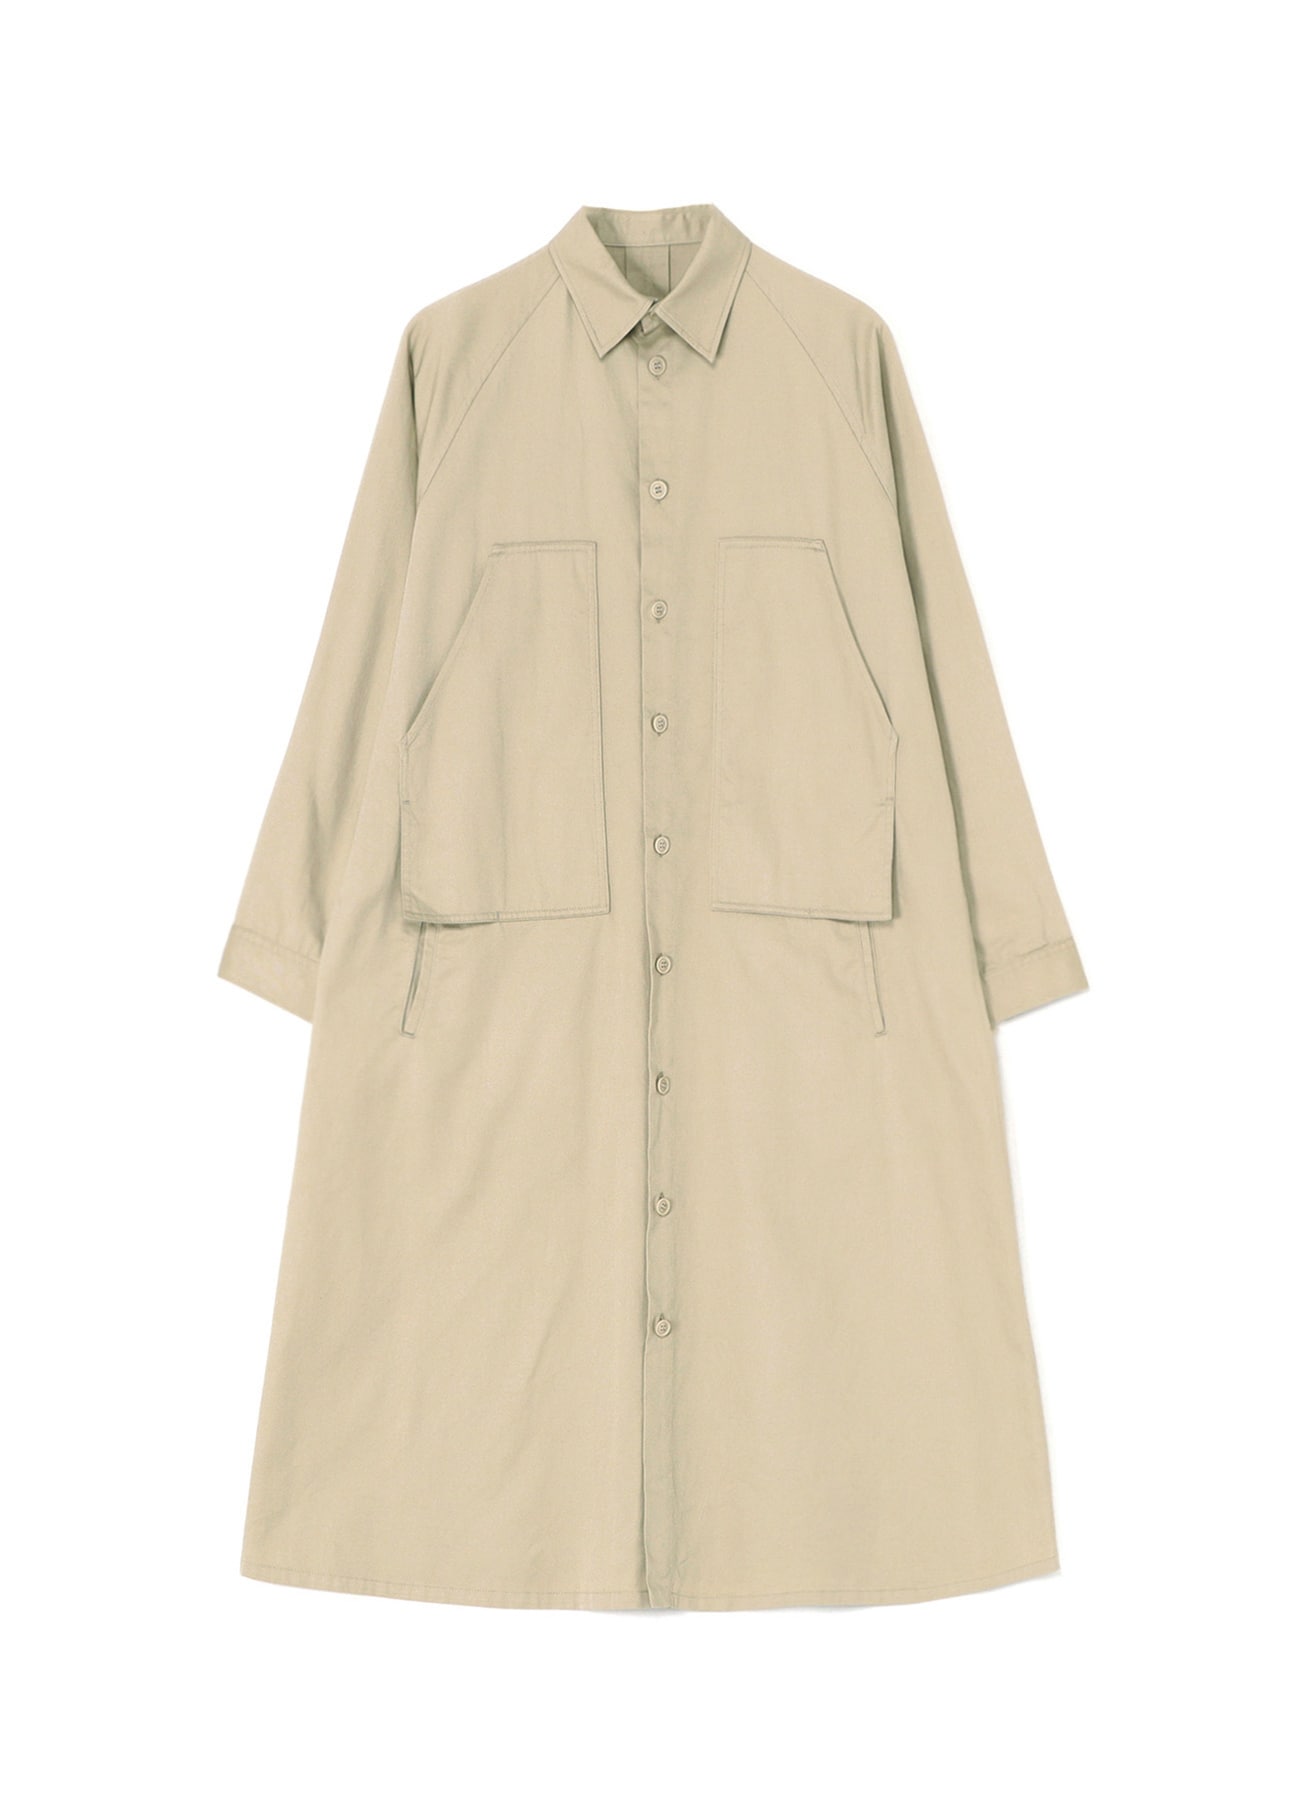 [Y's BORN PRODUCT] COTTON TWILL DOUBLE CHEST POCKET DRESS